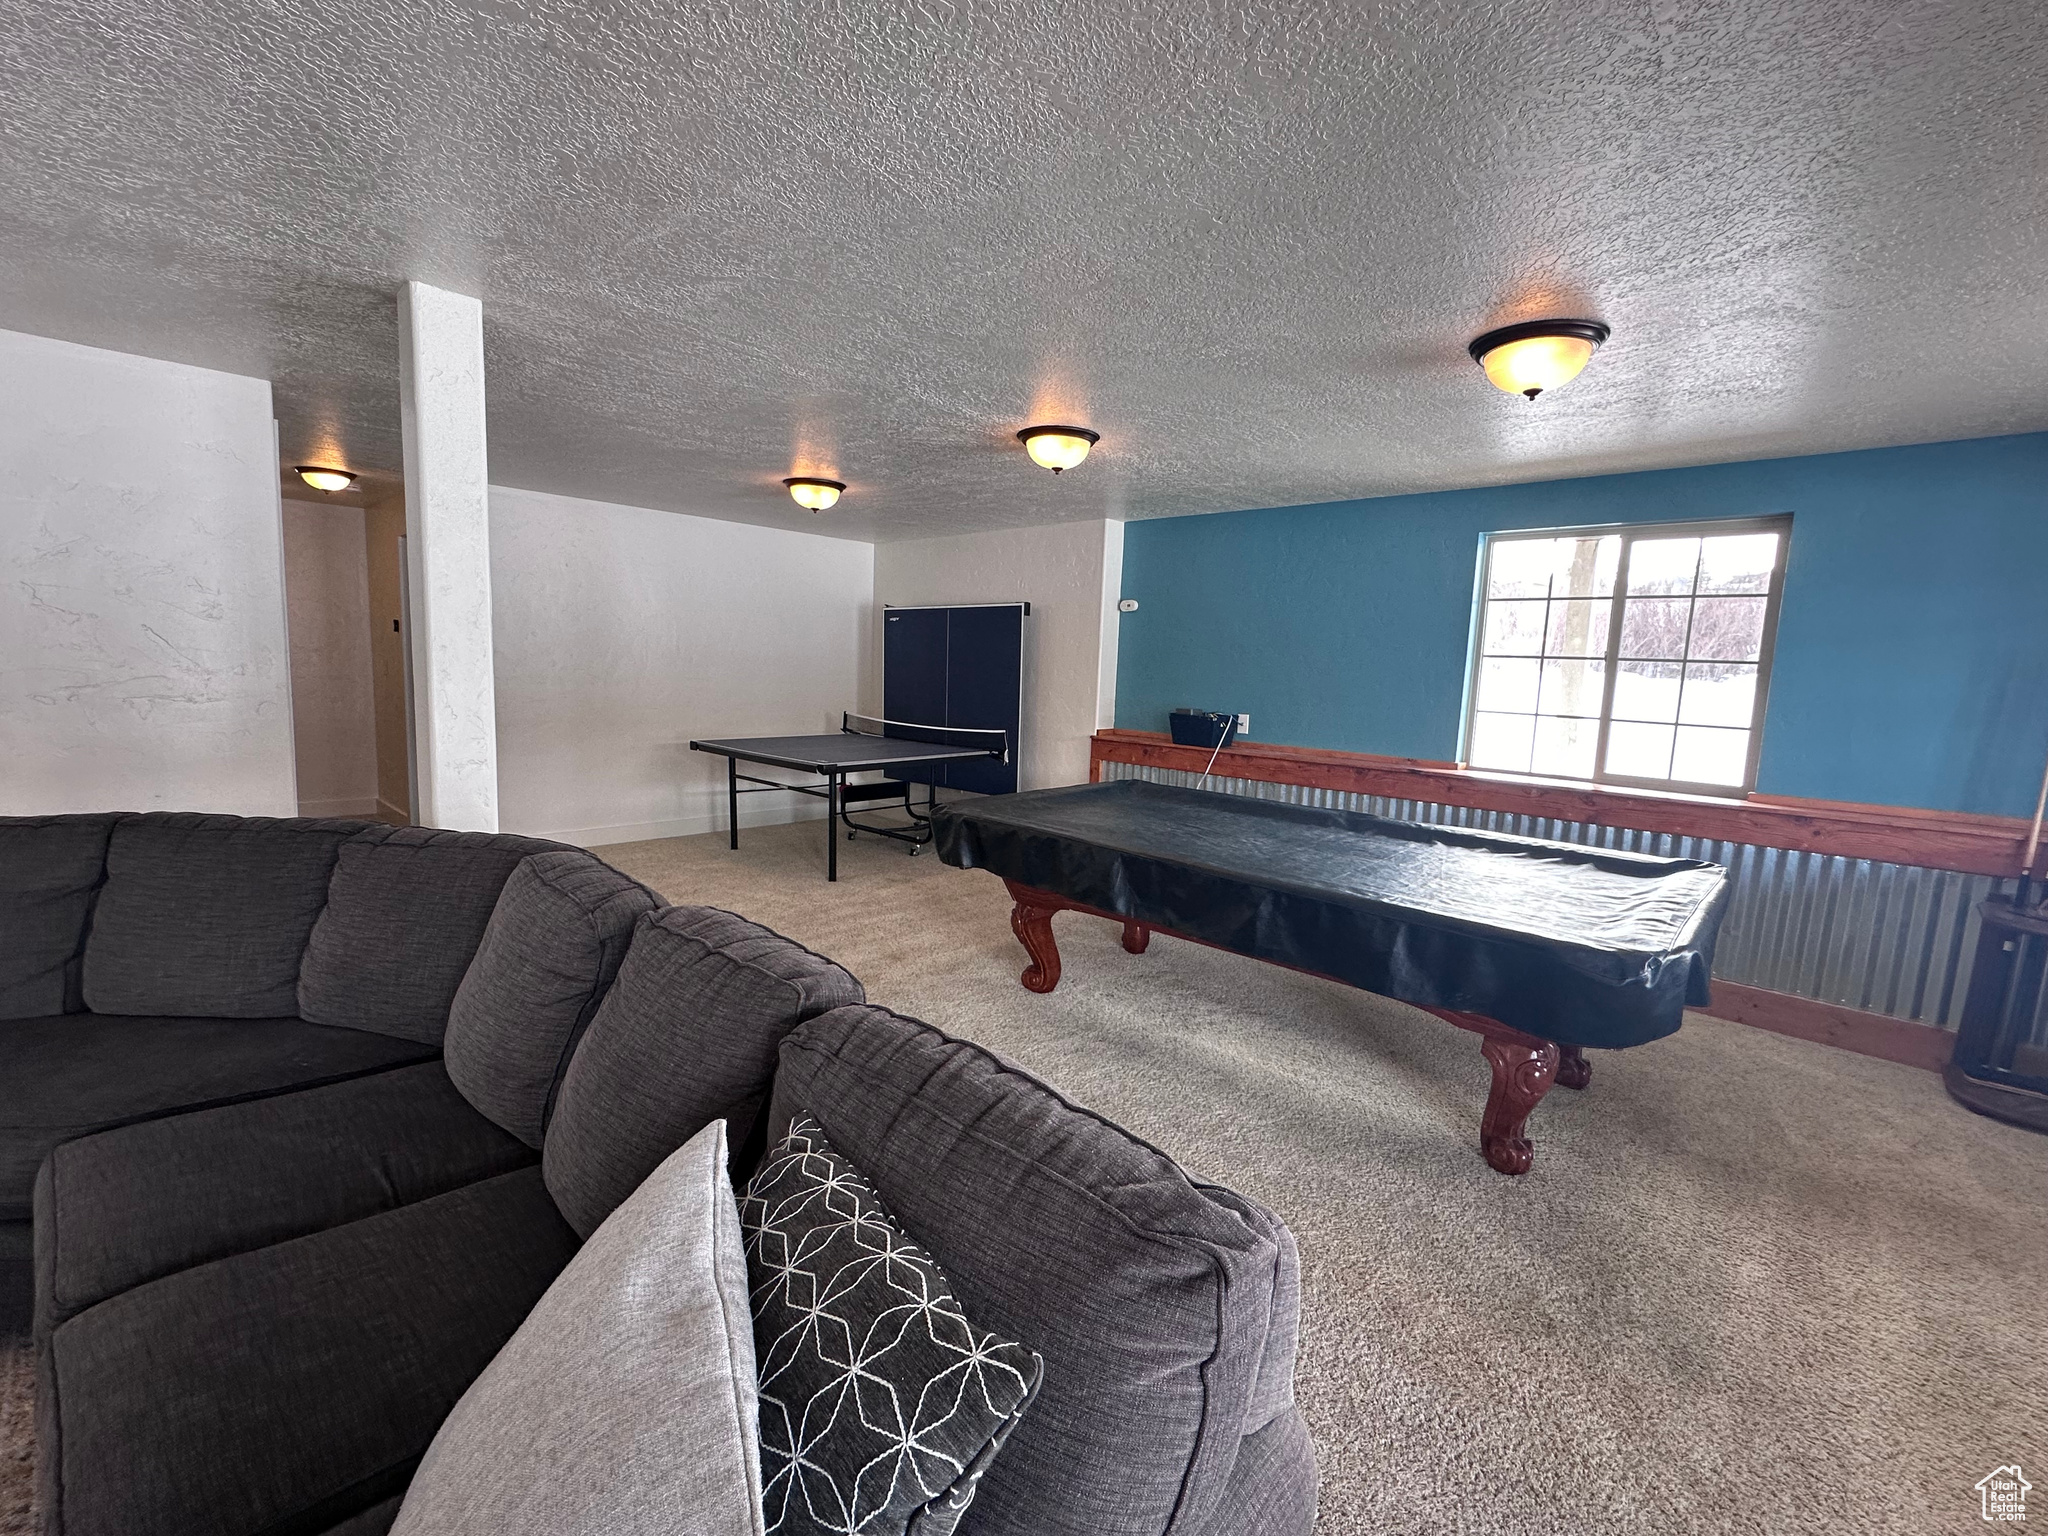 Recreation room with light colored carpet, and pool table and ping pong